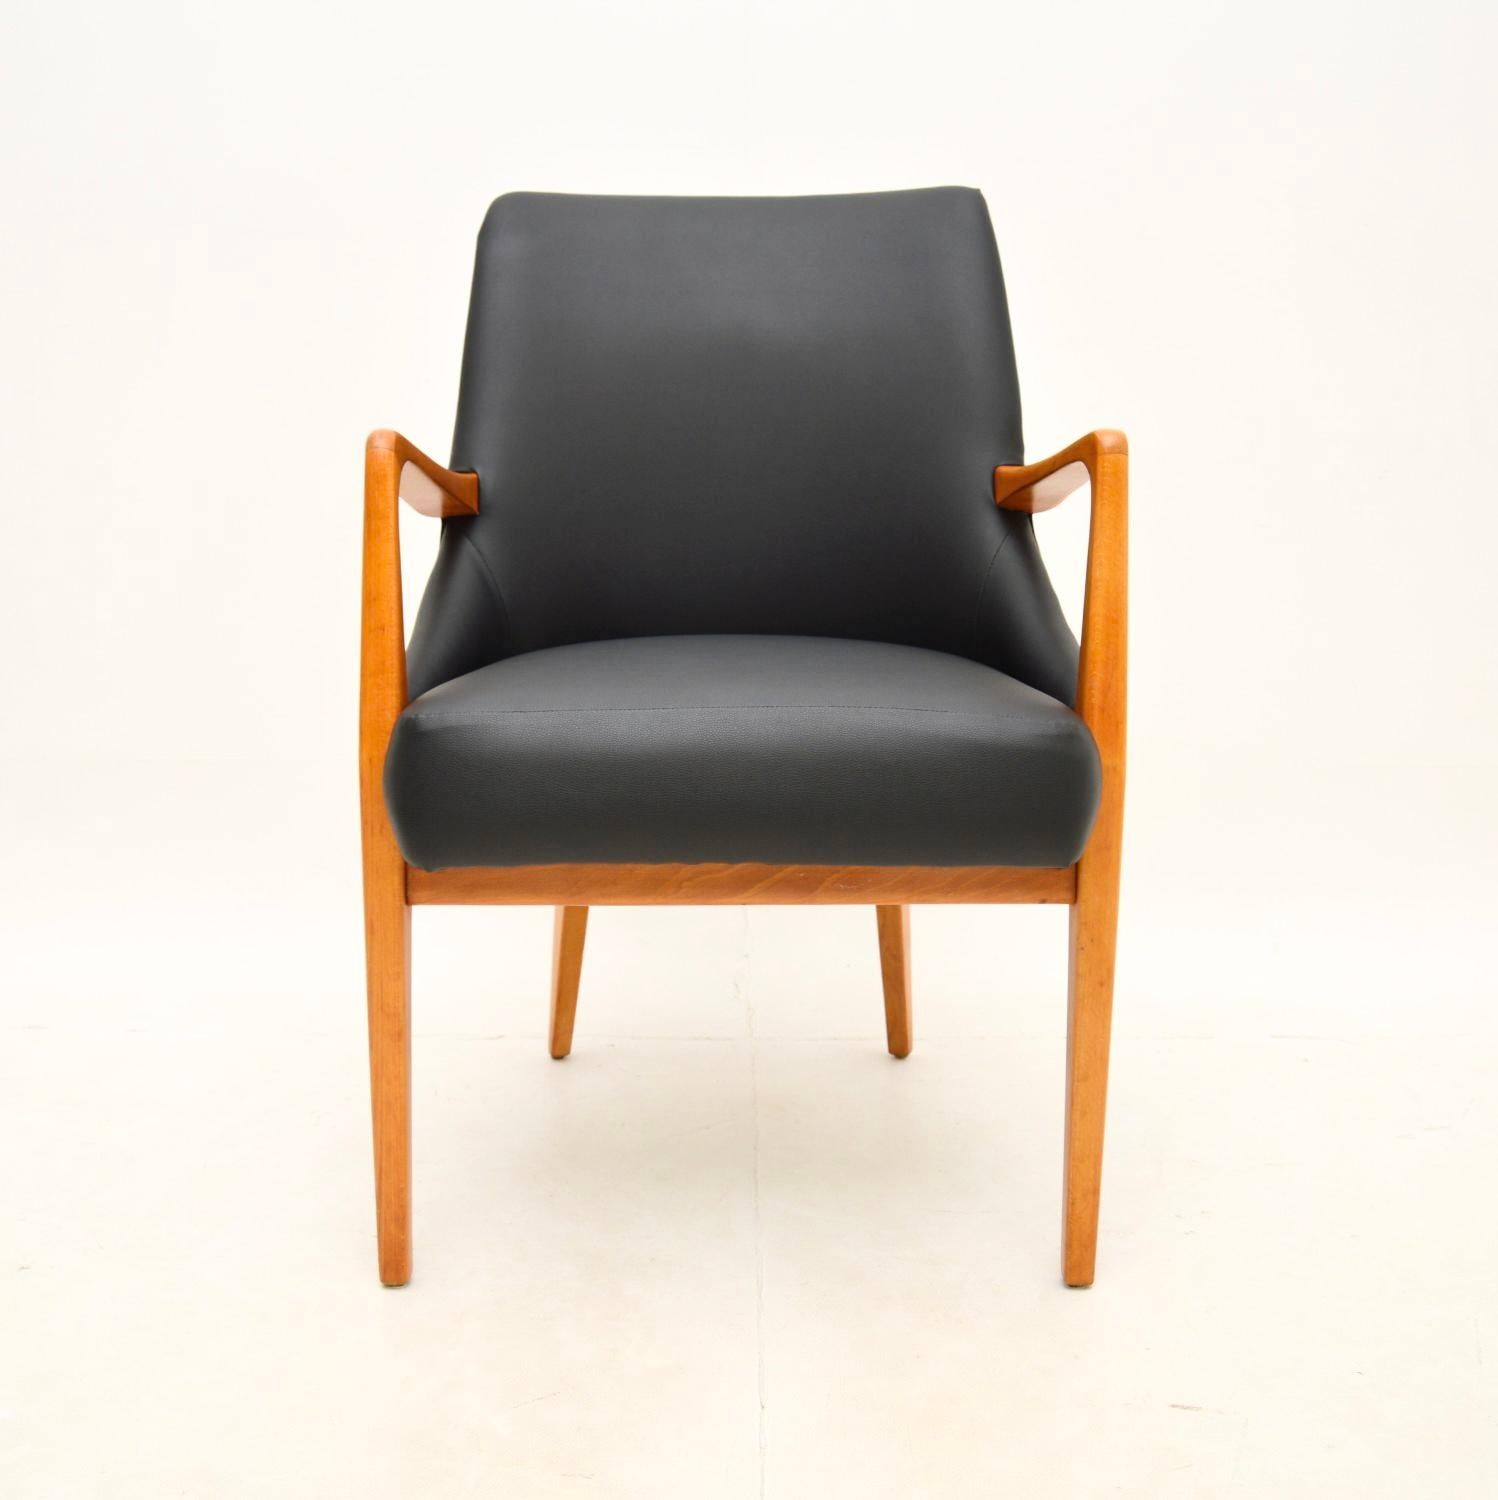 A very stylish and extremely comfortable vintage Danish desk chair / armchair. This was made in Denmark, it dates from the 1960’s.

It is of superb quality, with a sturdy build and beautiful design. It is a perfect size to be used as a desk chair or